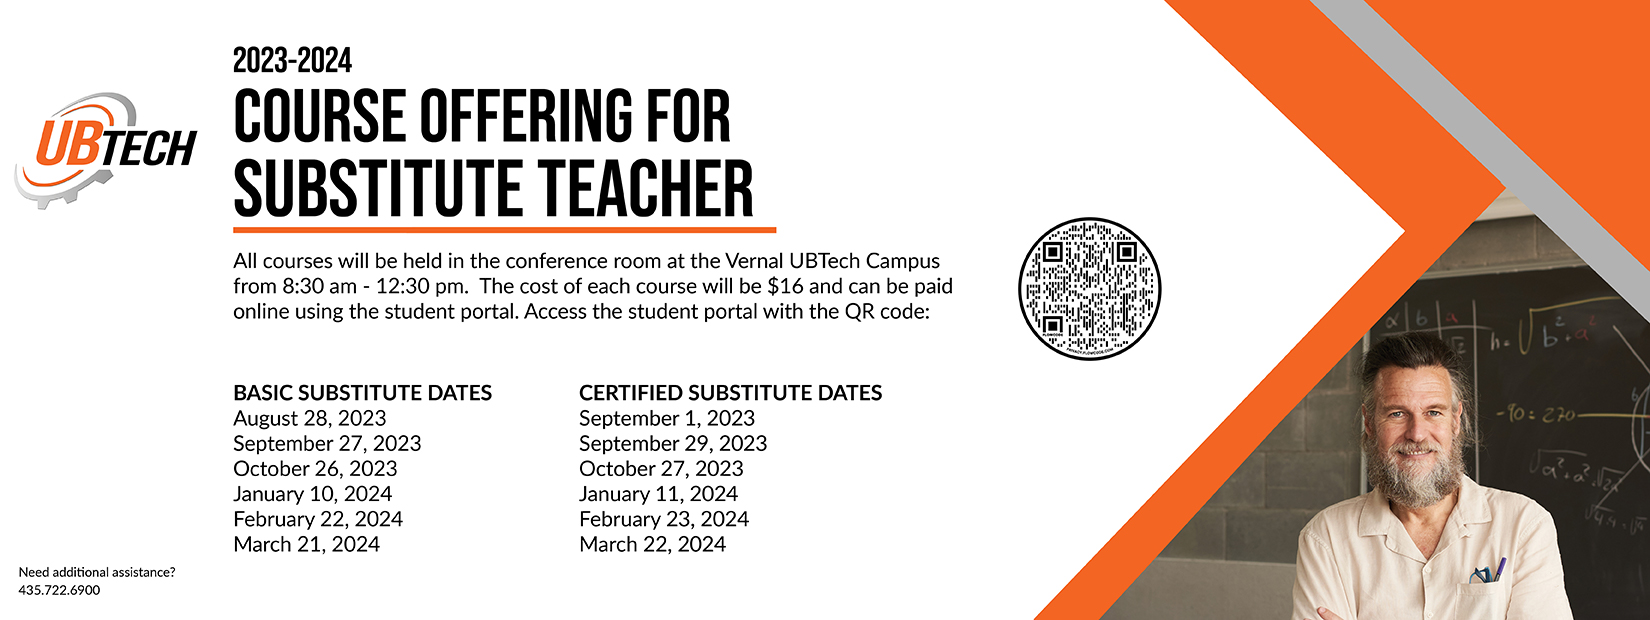 2023-2024 Course Offering for Substitute Teacher. All courses will be held on the conference room at the UBTech Vernal campus from 8:30am to 12:30pm. The cost of each course will be $16 and can be paid online using the student portal. Basic Substitute Dates: 8/28, 9/27, 10/26, 1/10, 2/22, and 3/21; Certified Substitute Dates: 9/1, 9/29, 10/27, 1/11, 2/23, 3/22.